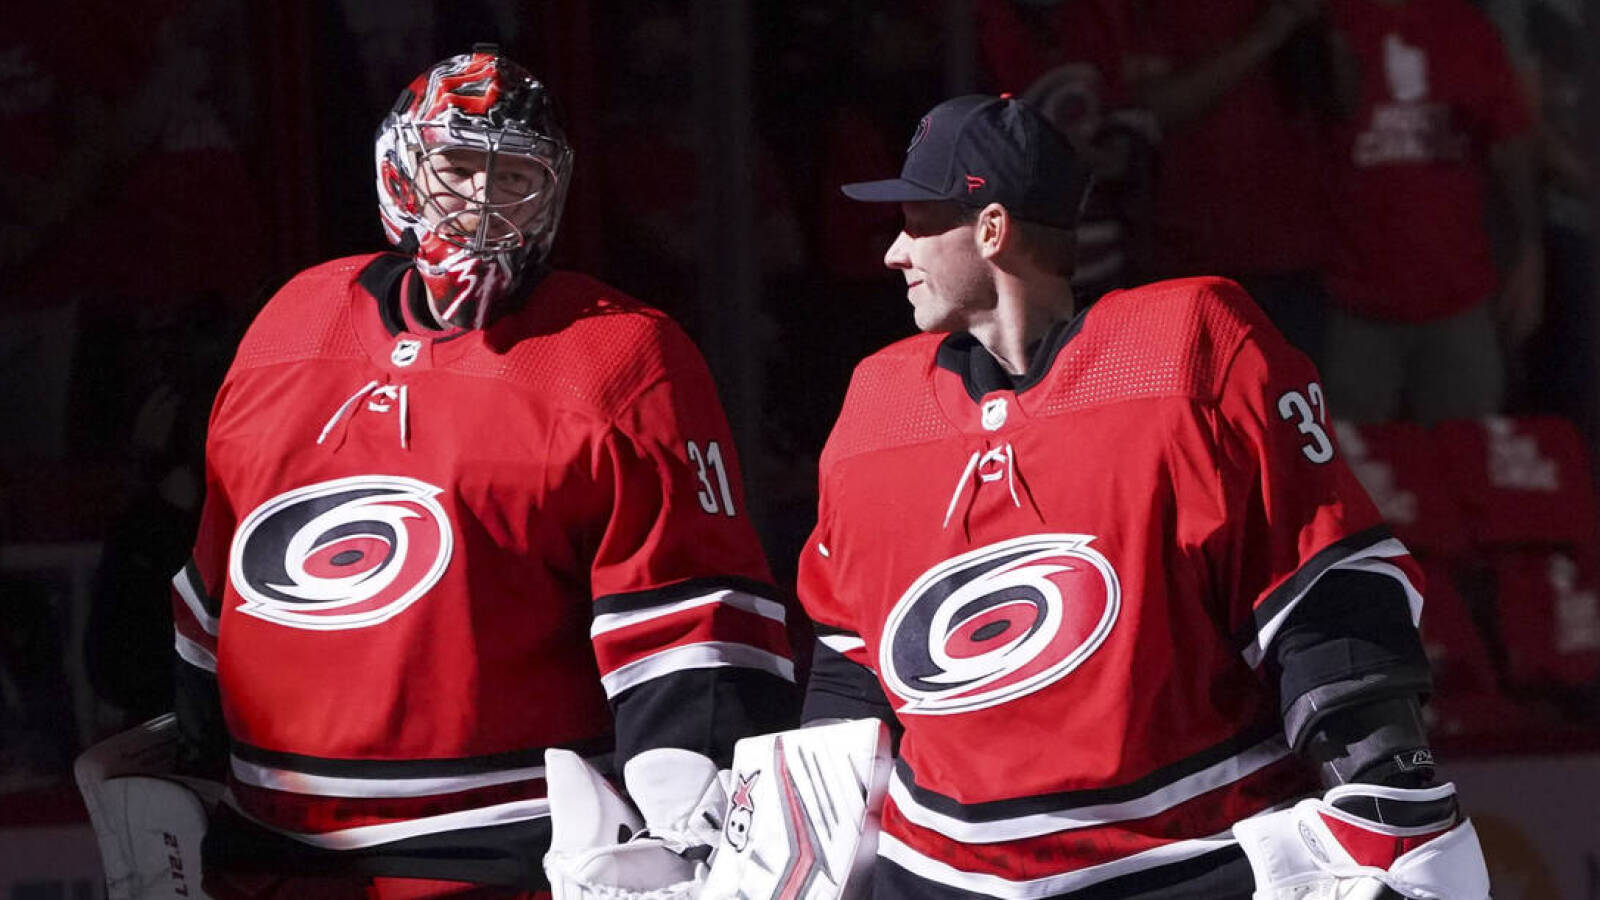 Free Agent Profile  Hurricanes duo of Andersen and Raanta could be primary  Sabres targets